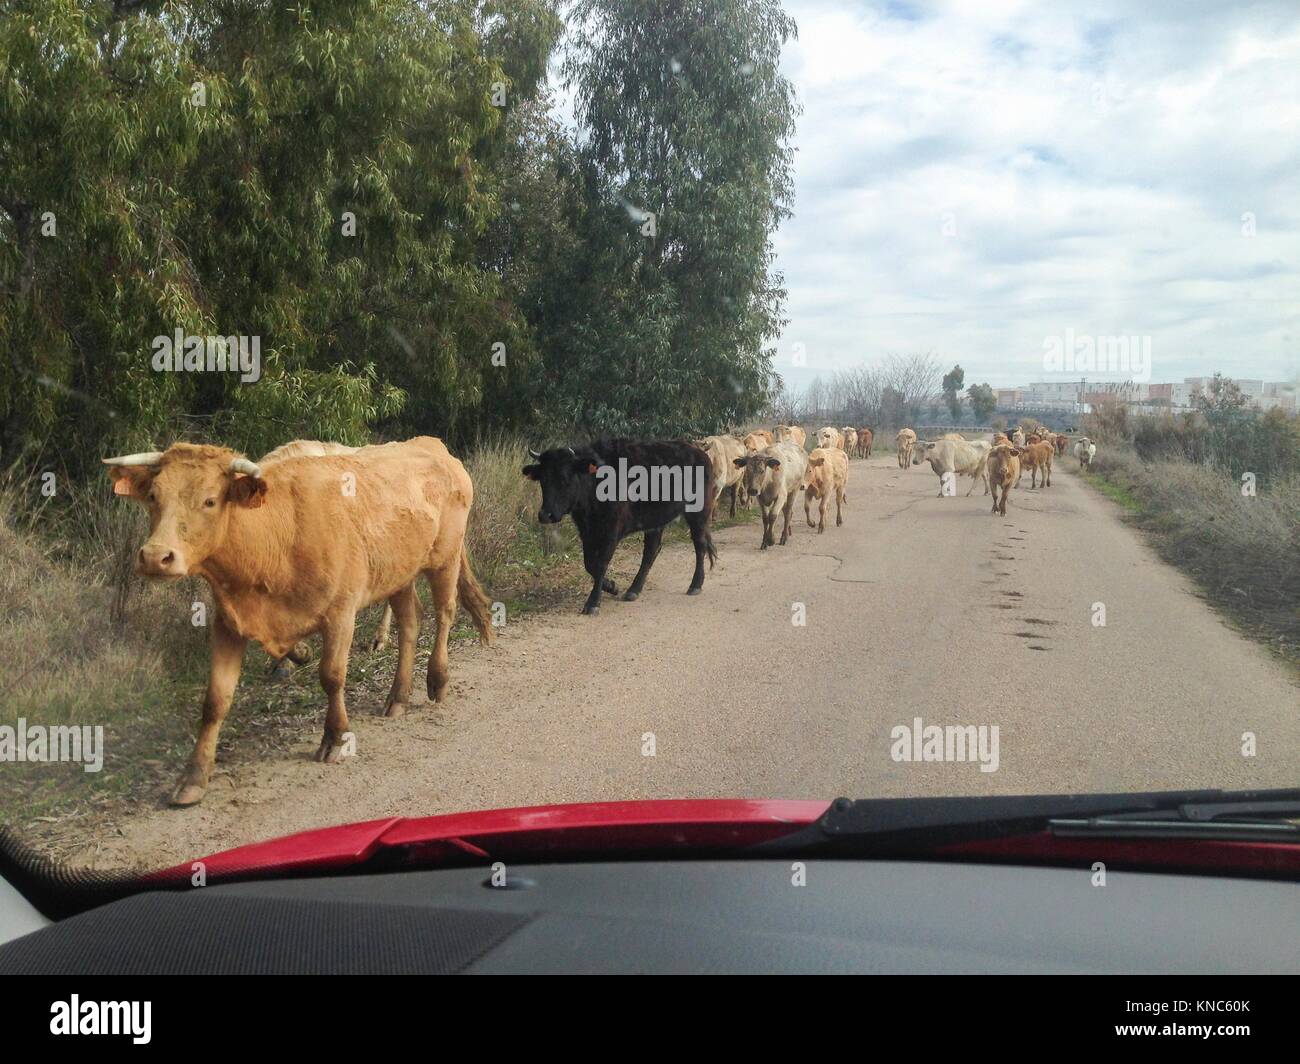 Driving slowly with animals at local road. Cows crossing. View from the inside of the car. Stock Photo